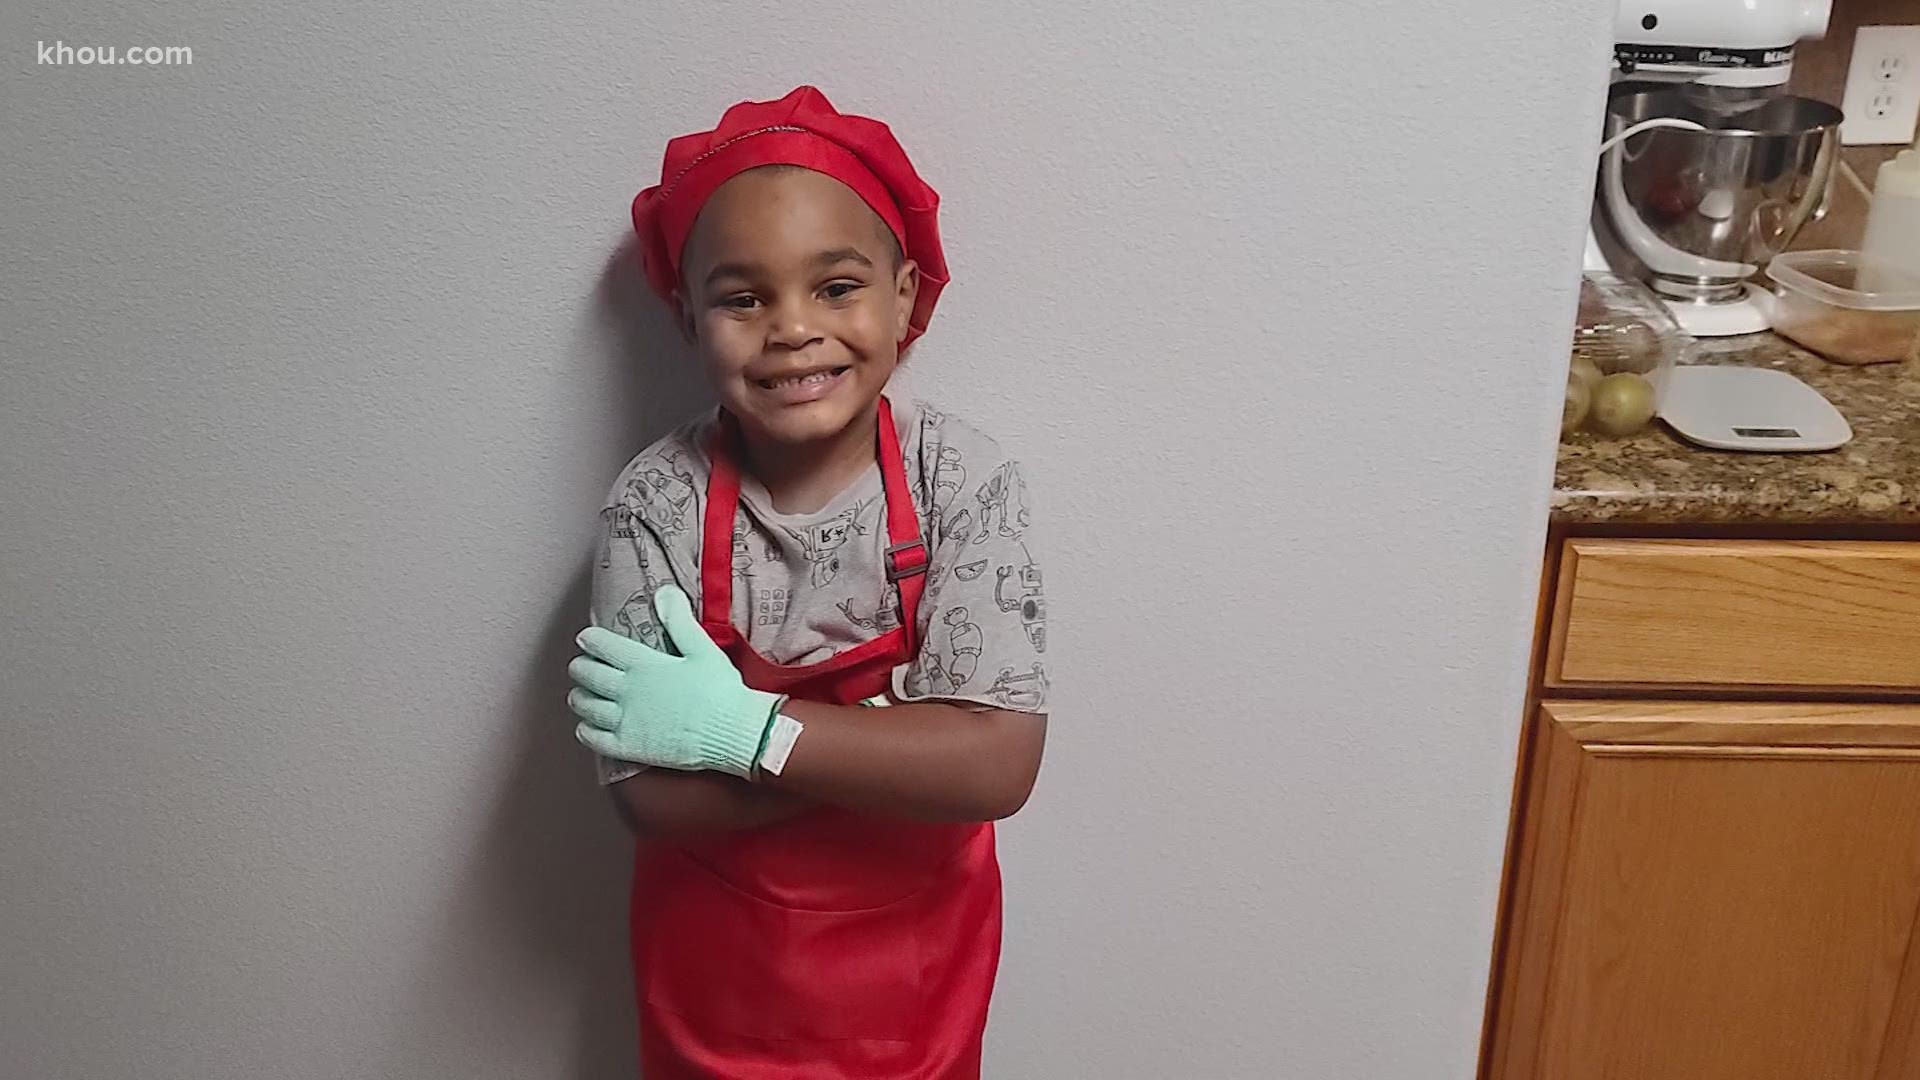 7-year-old Phil Alexander and his dad launched Phil's Table in June. From burgers to waffles, the pair is hitting a sweet spot with people craving kindness.